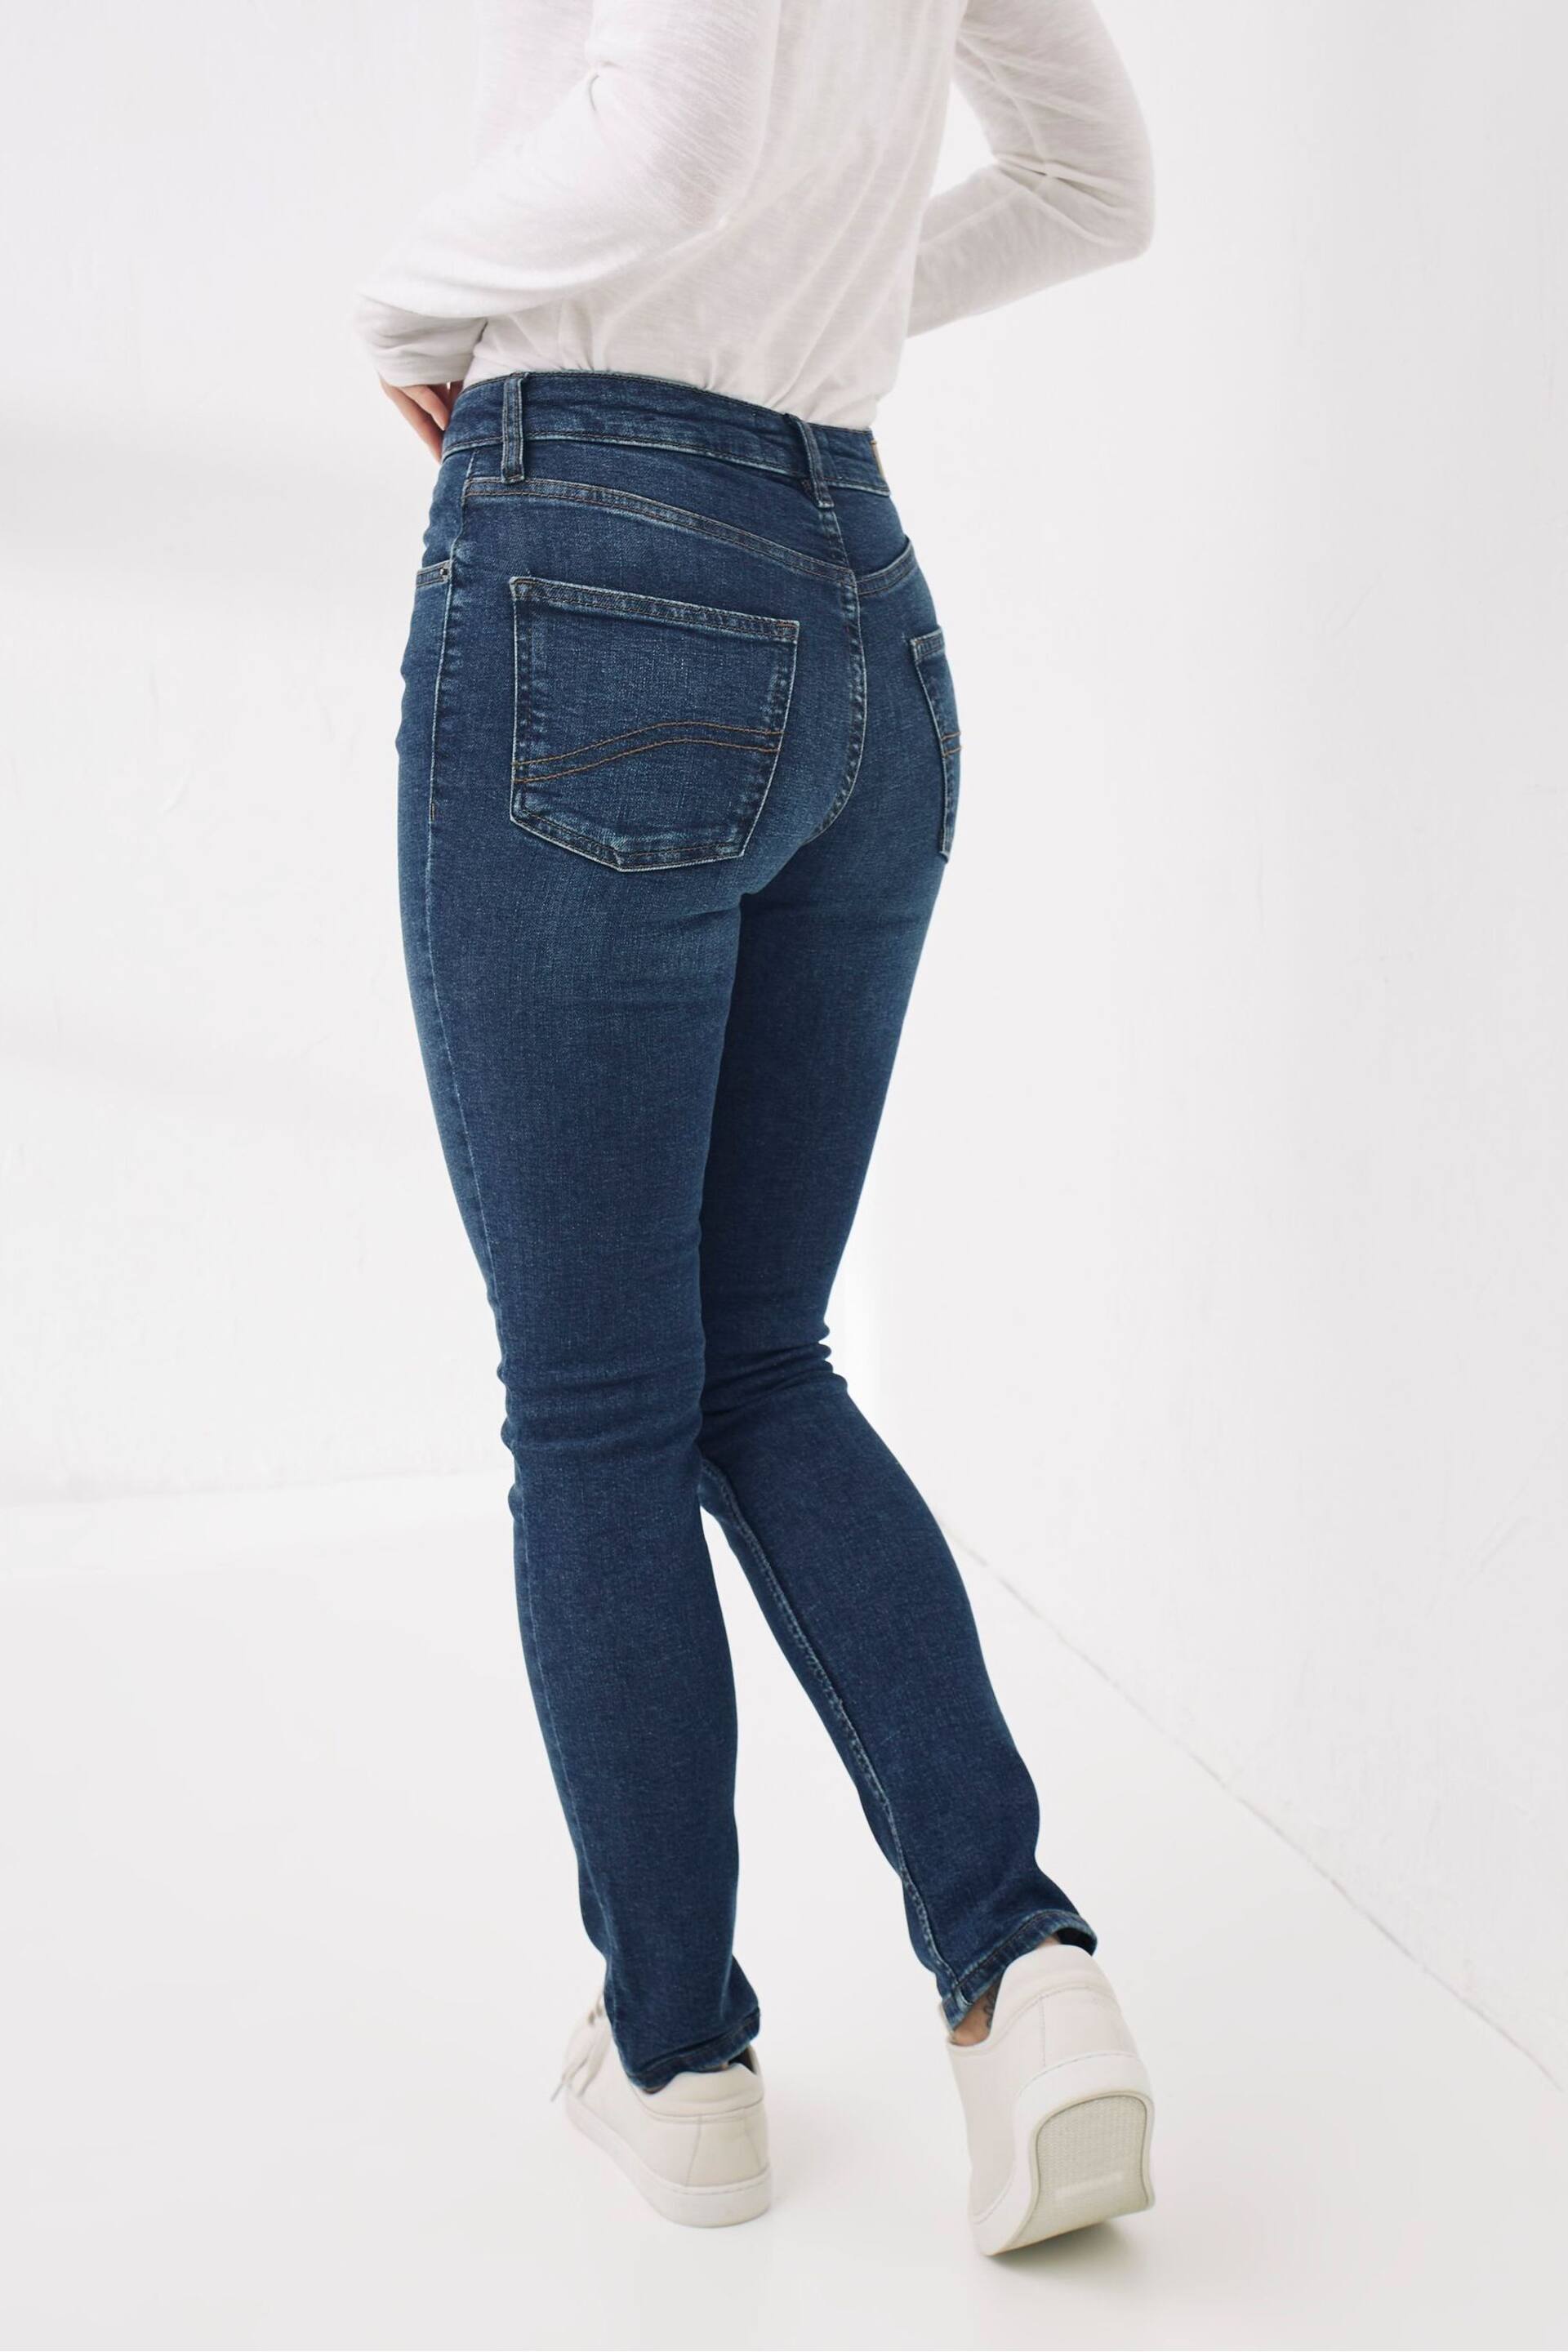 FatFace Blue Sway Slim Jeans - Image 2 of 4